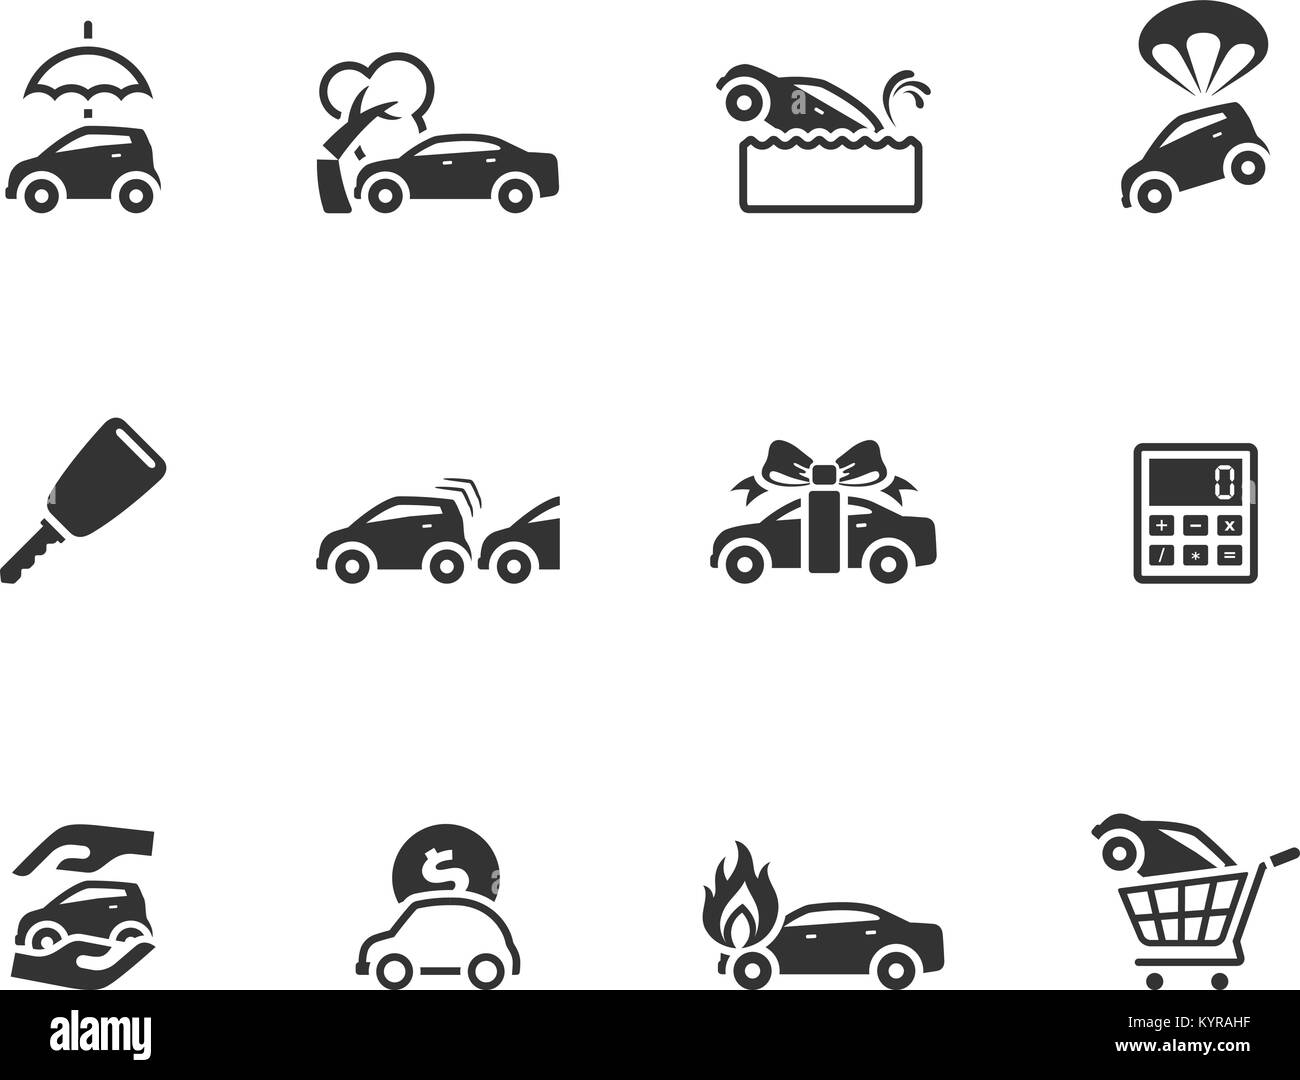 Car insurance icons in single color. Vector illustration. Stock Vector